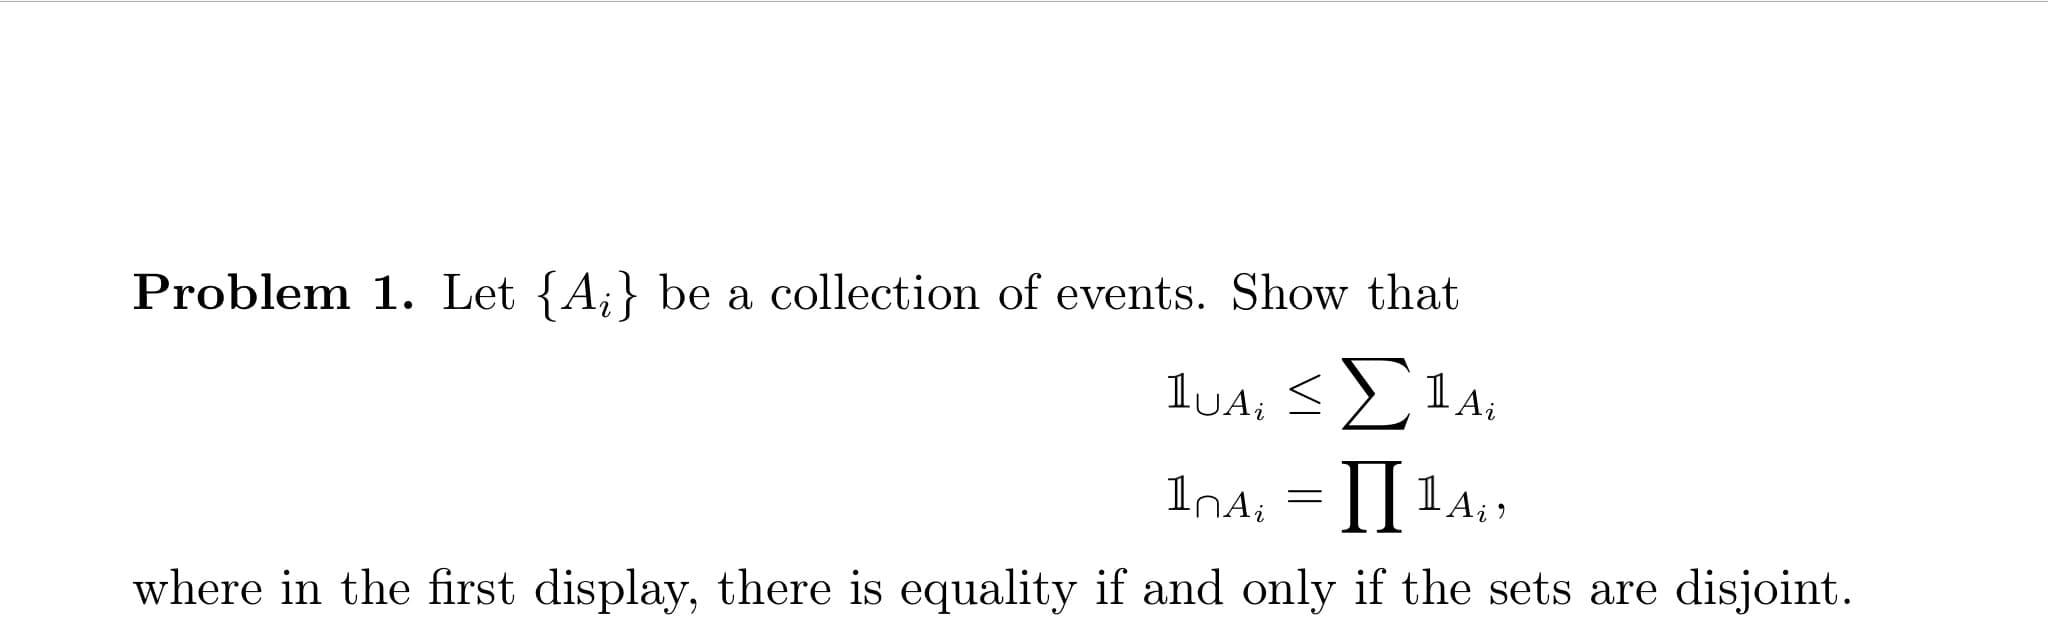 Problem 1. Let {A,^ be a collection of events. Show that
UA,
I
2
where in the first display, there is equality if and only if the sets are disjoint
